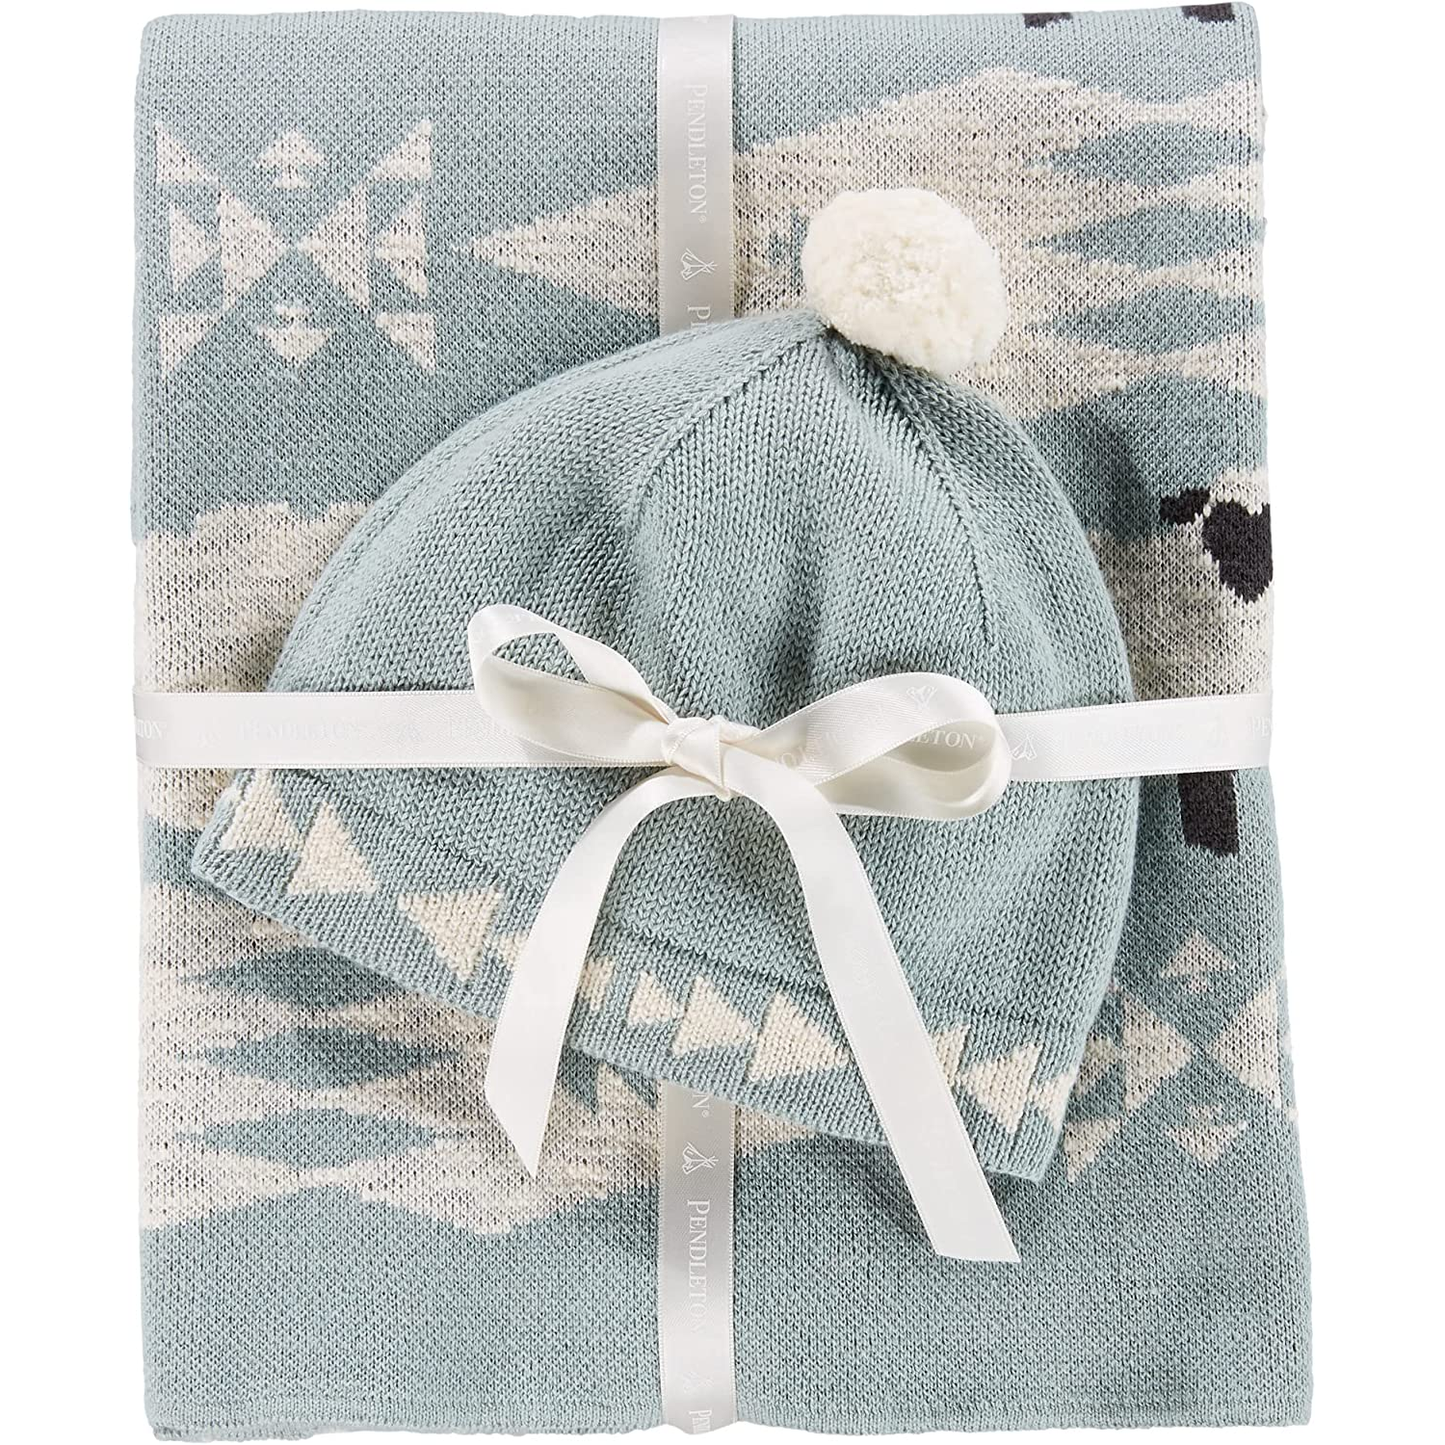 Pendleton Baby Blanket with Beanie - Sheep Dreams